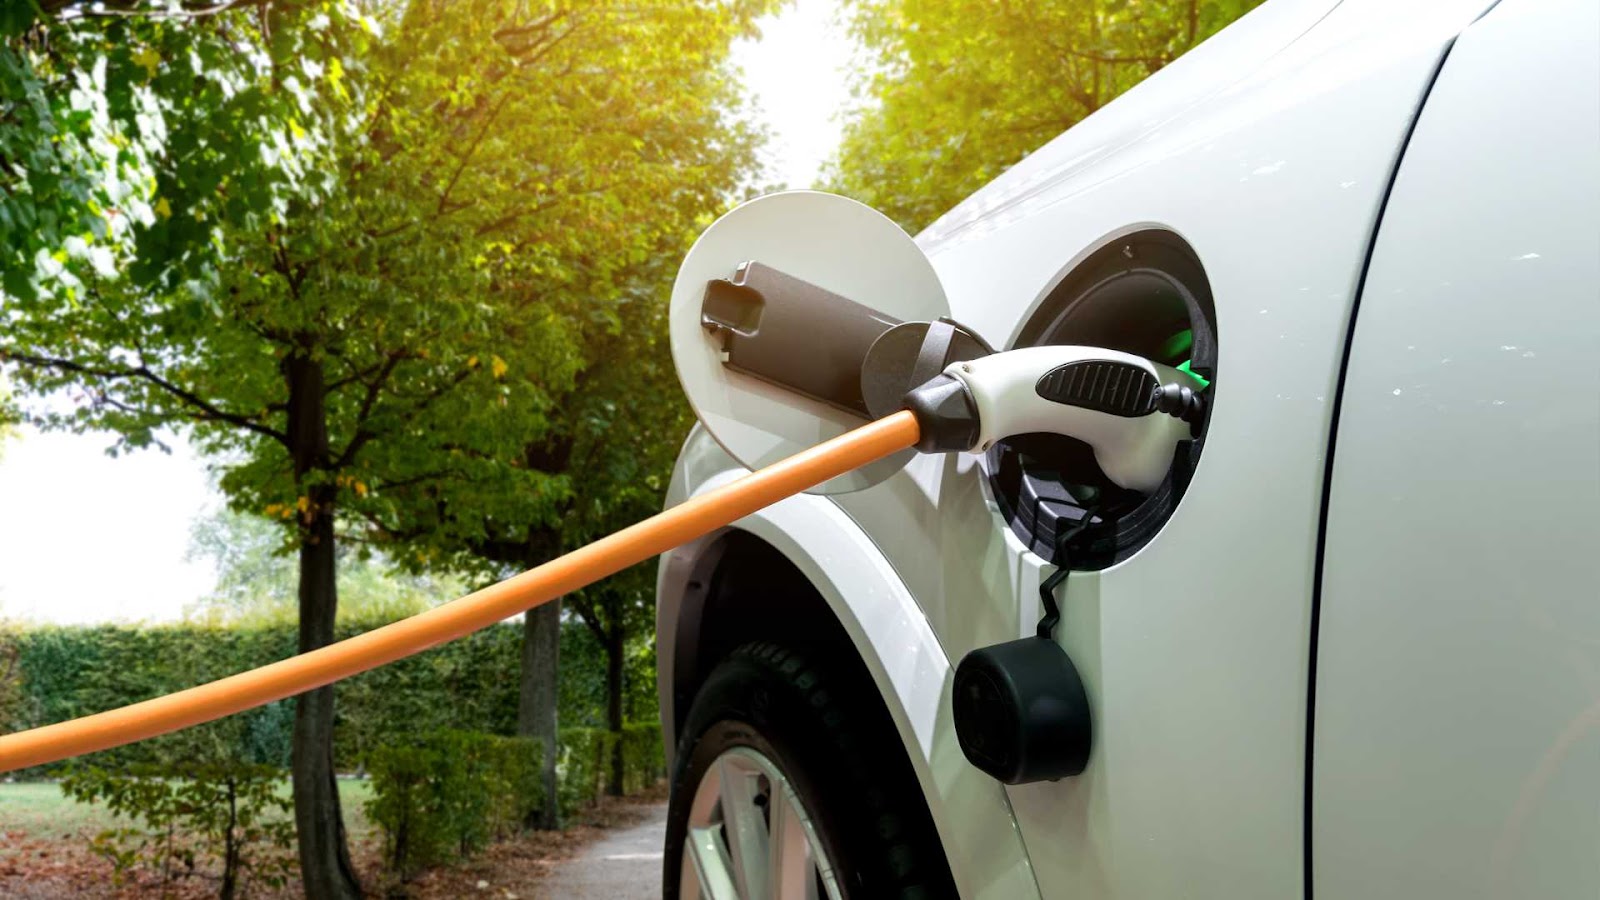 Why I Bought An Ev And Embrace Living Without A Car